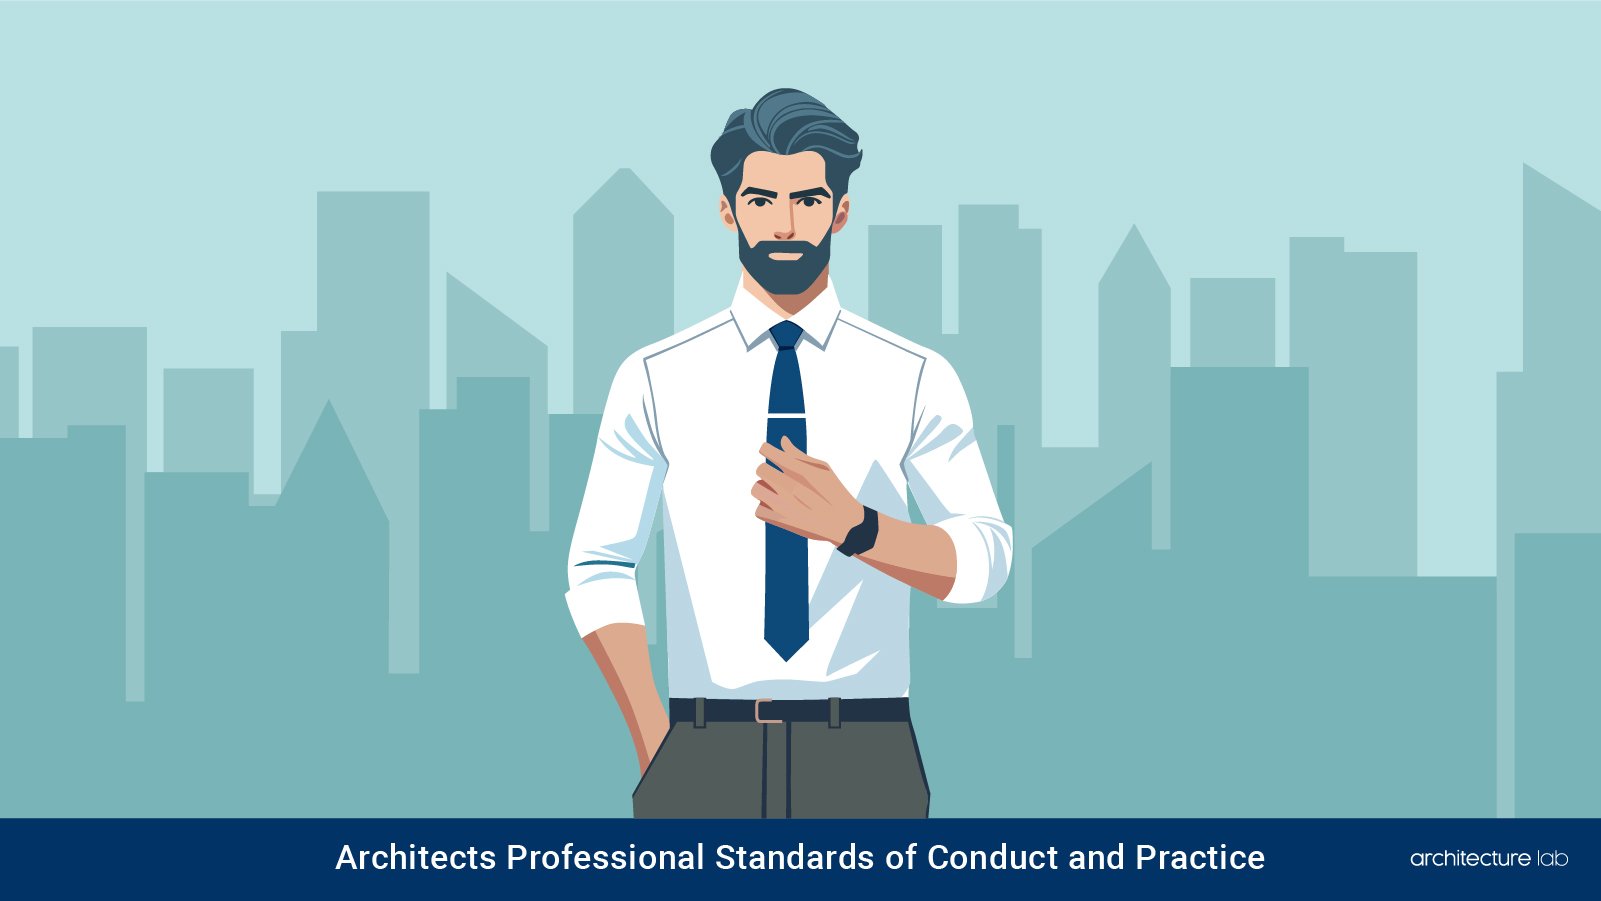 10 professional standards of conduct and practice between architects